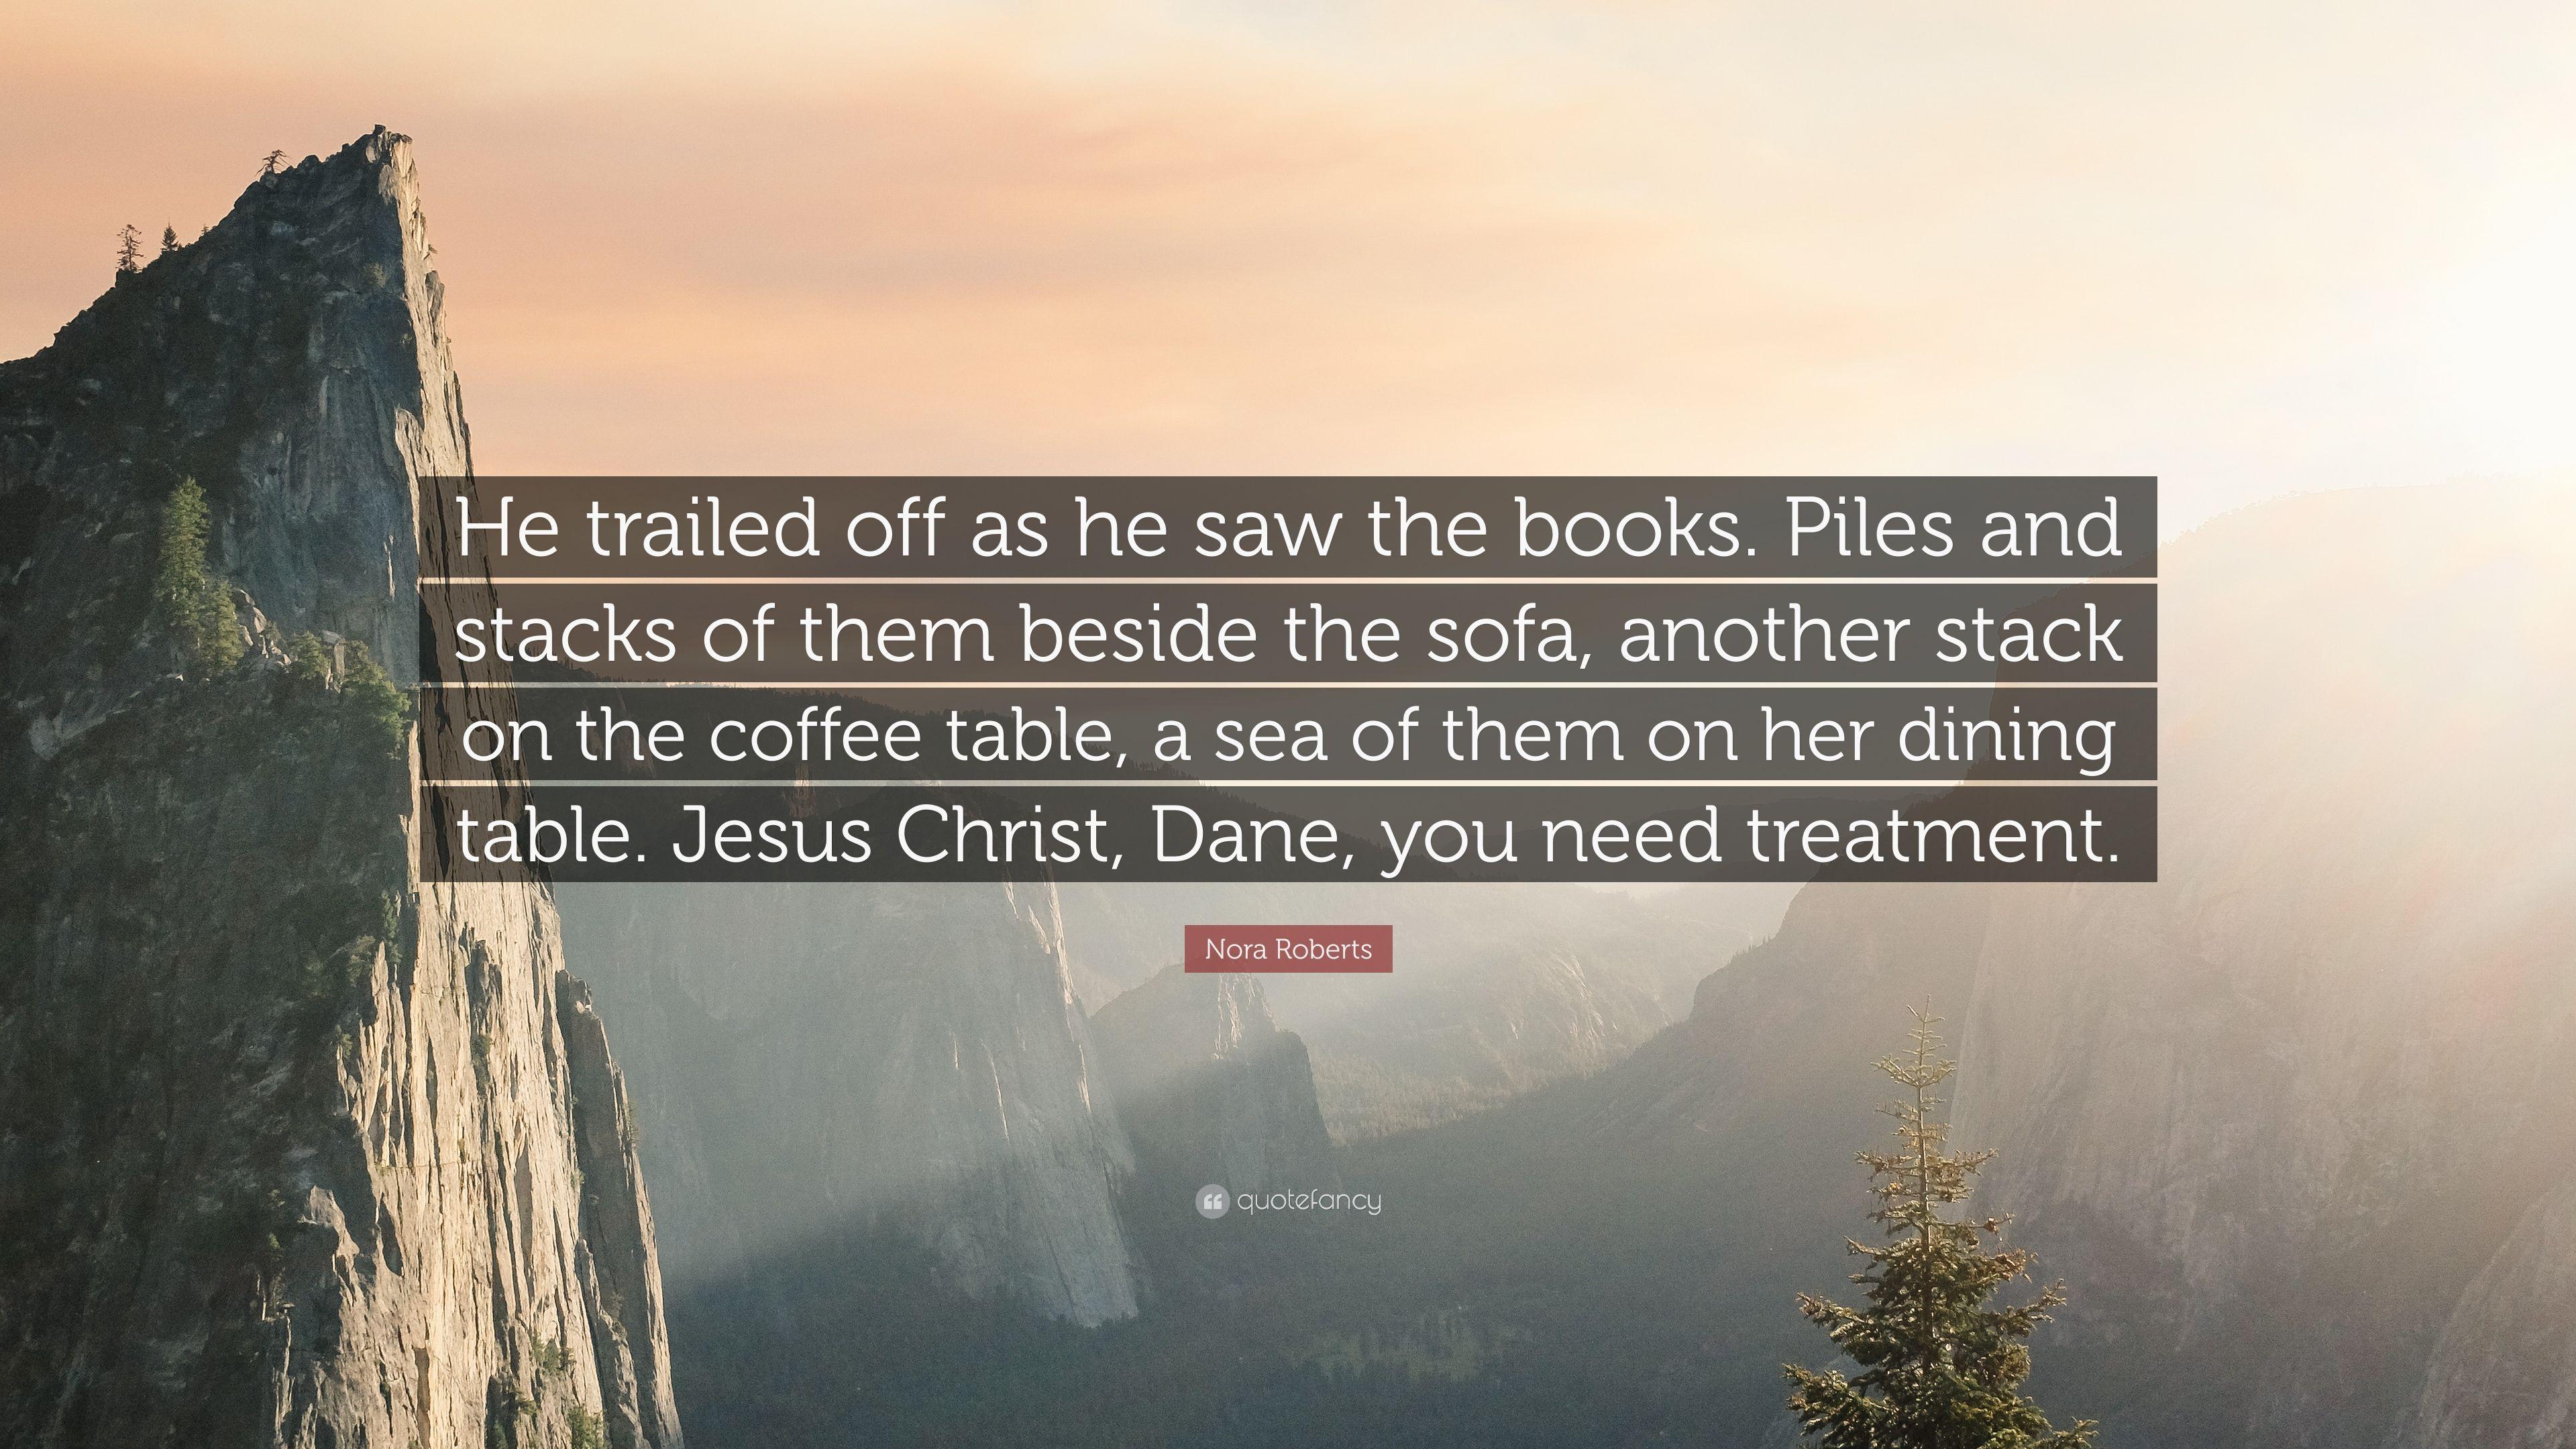 Nora Roberts Quote: “He trailed off as he saw the books. Piles